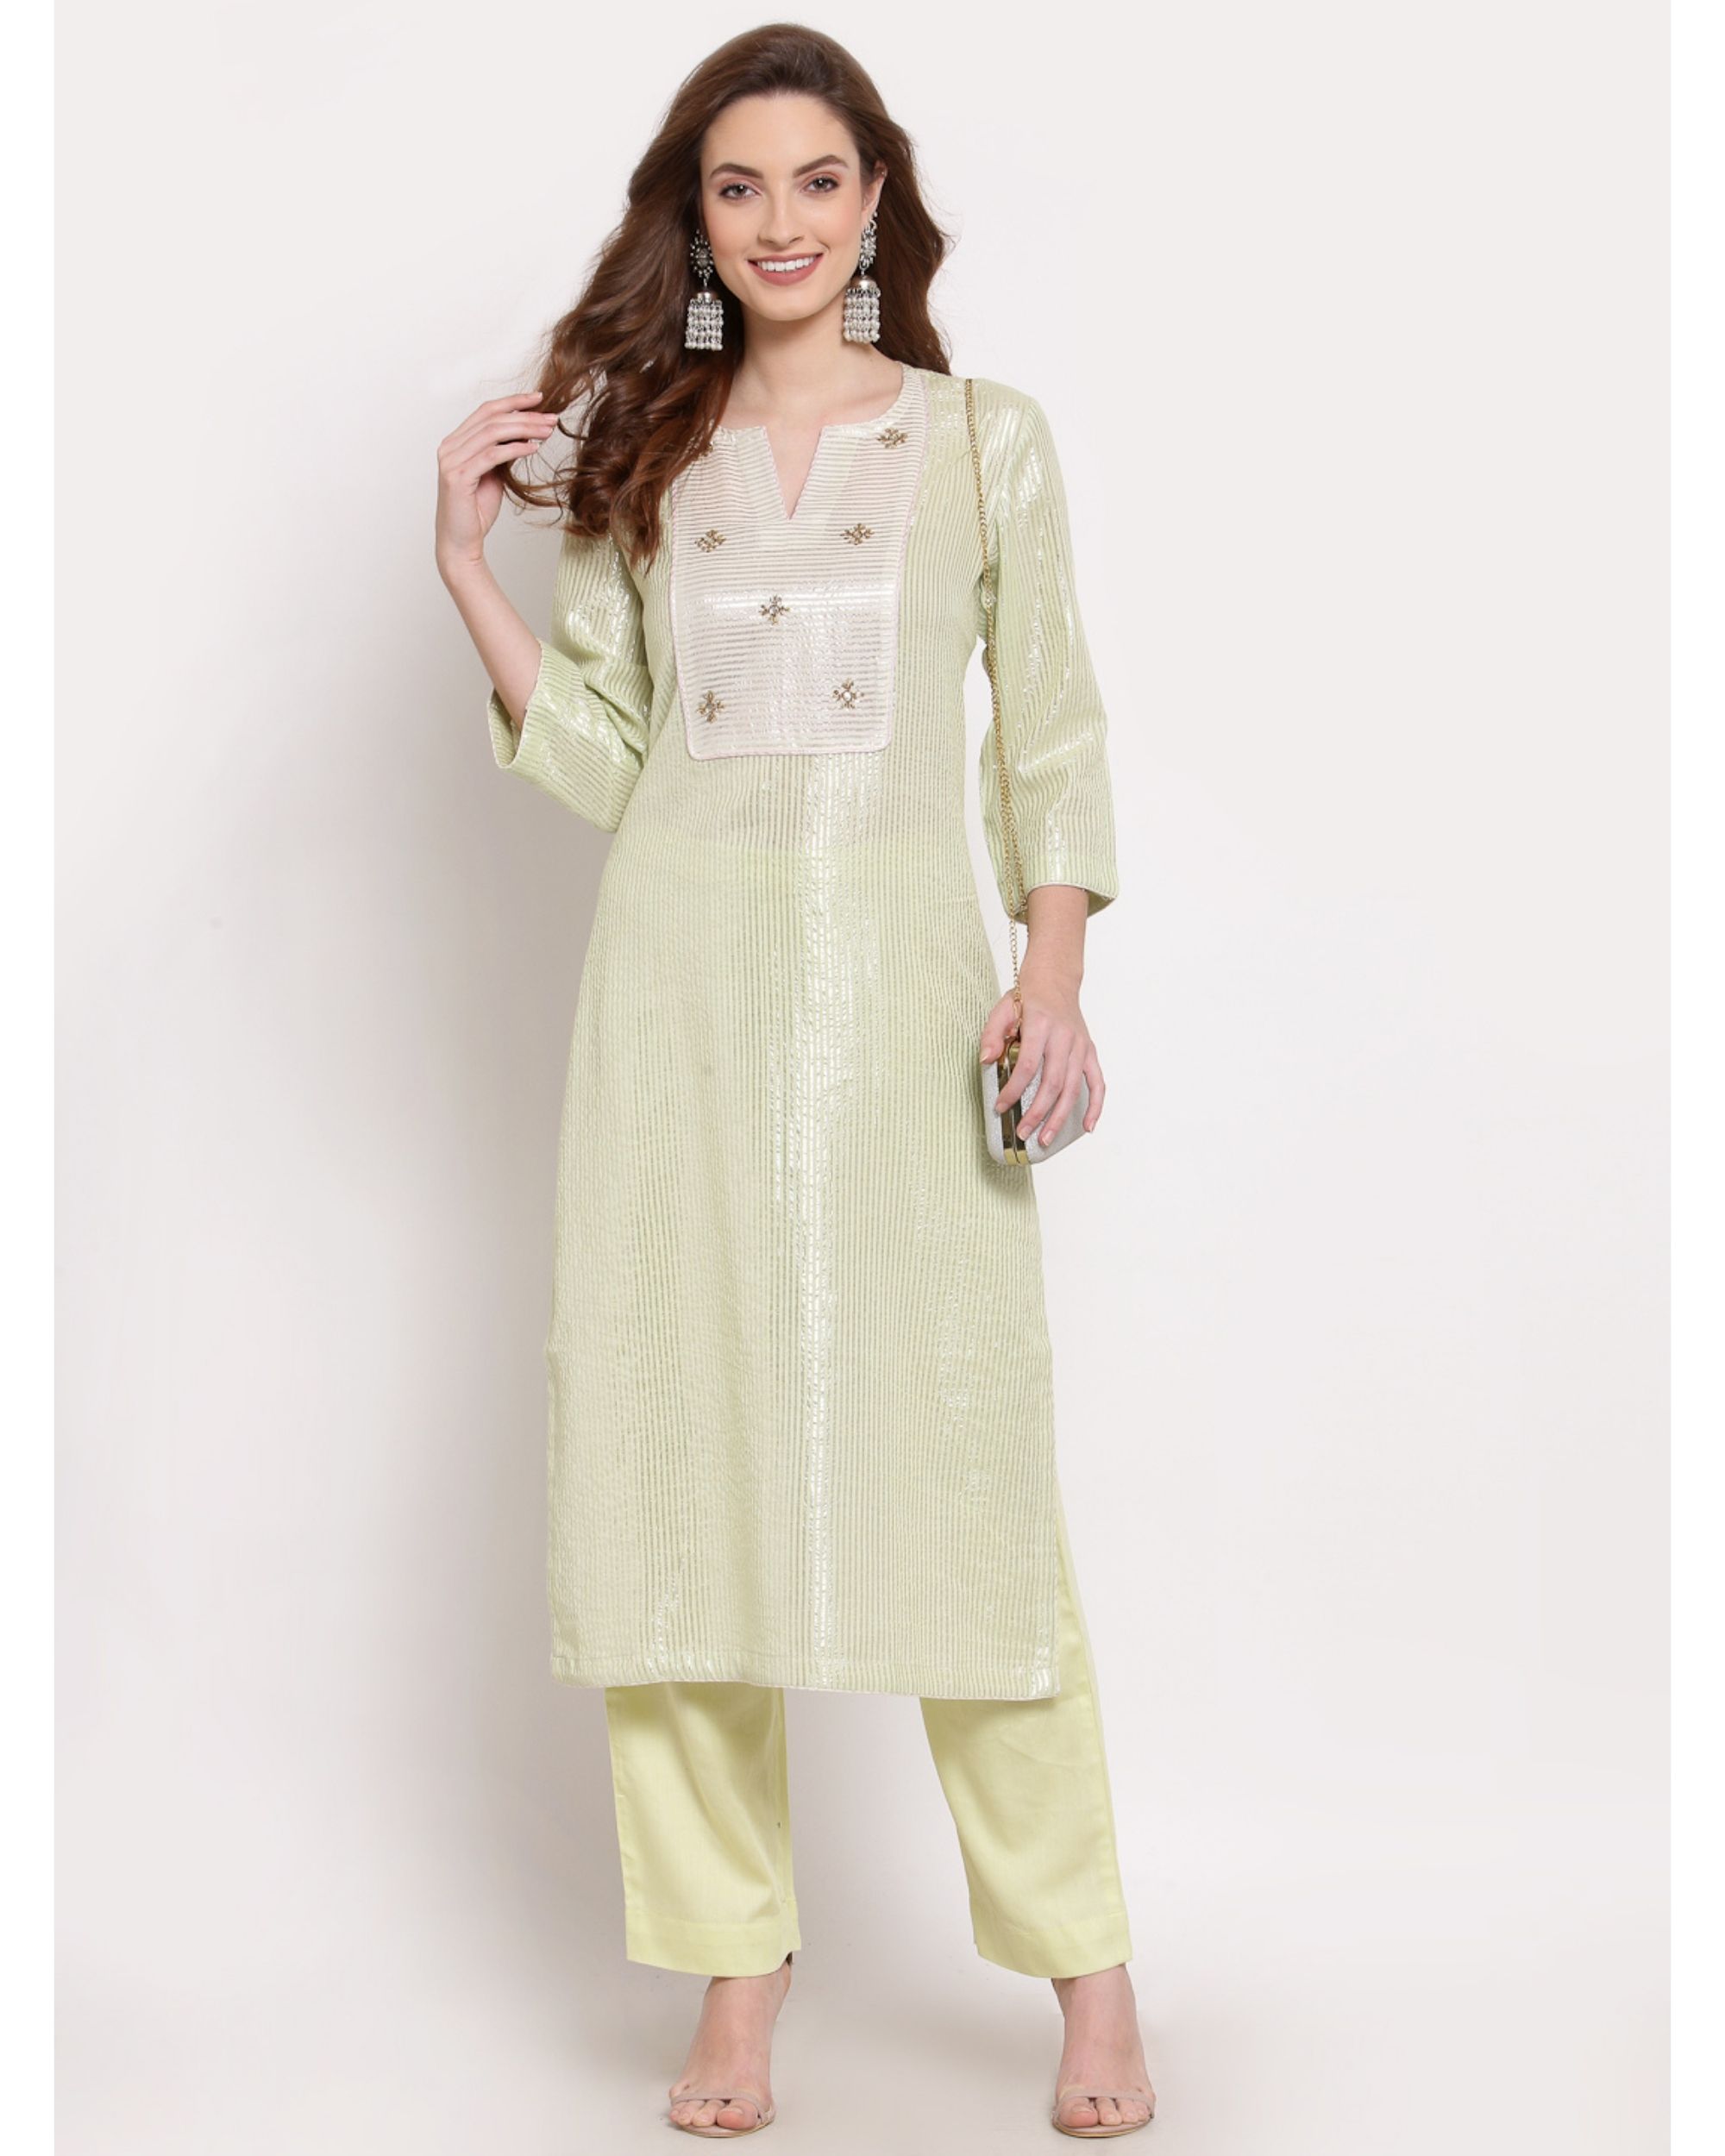 Green and white striped embroidered kurta